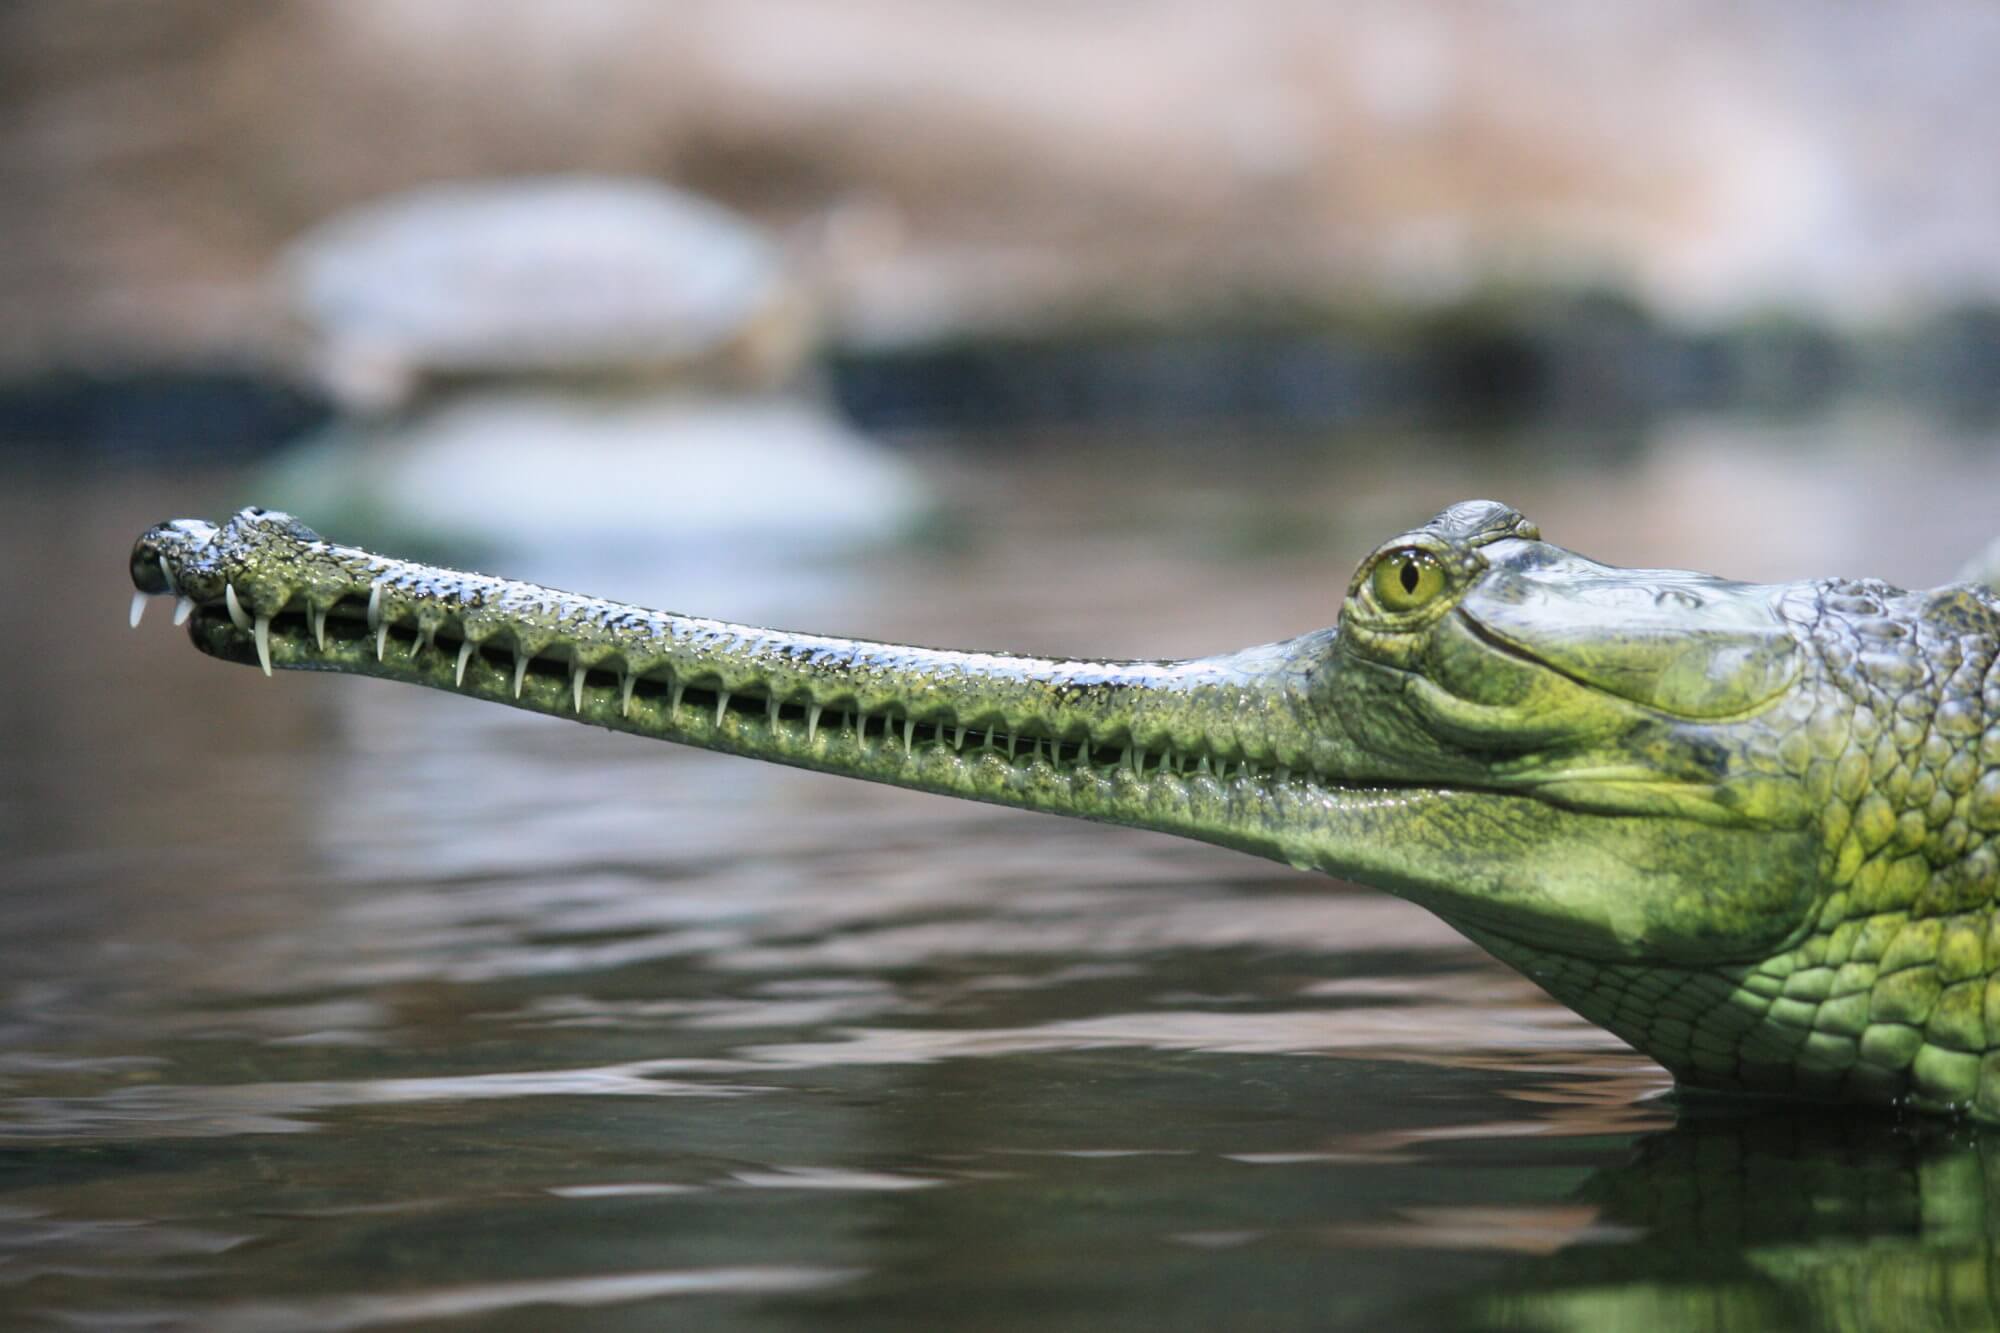 The rarest crocodile species has started to proliferate